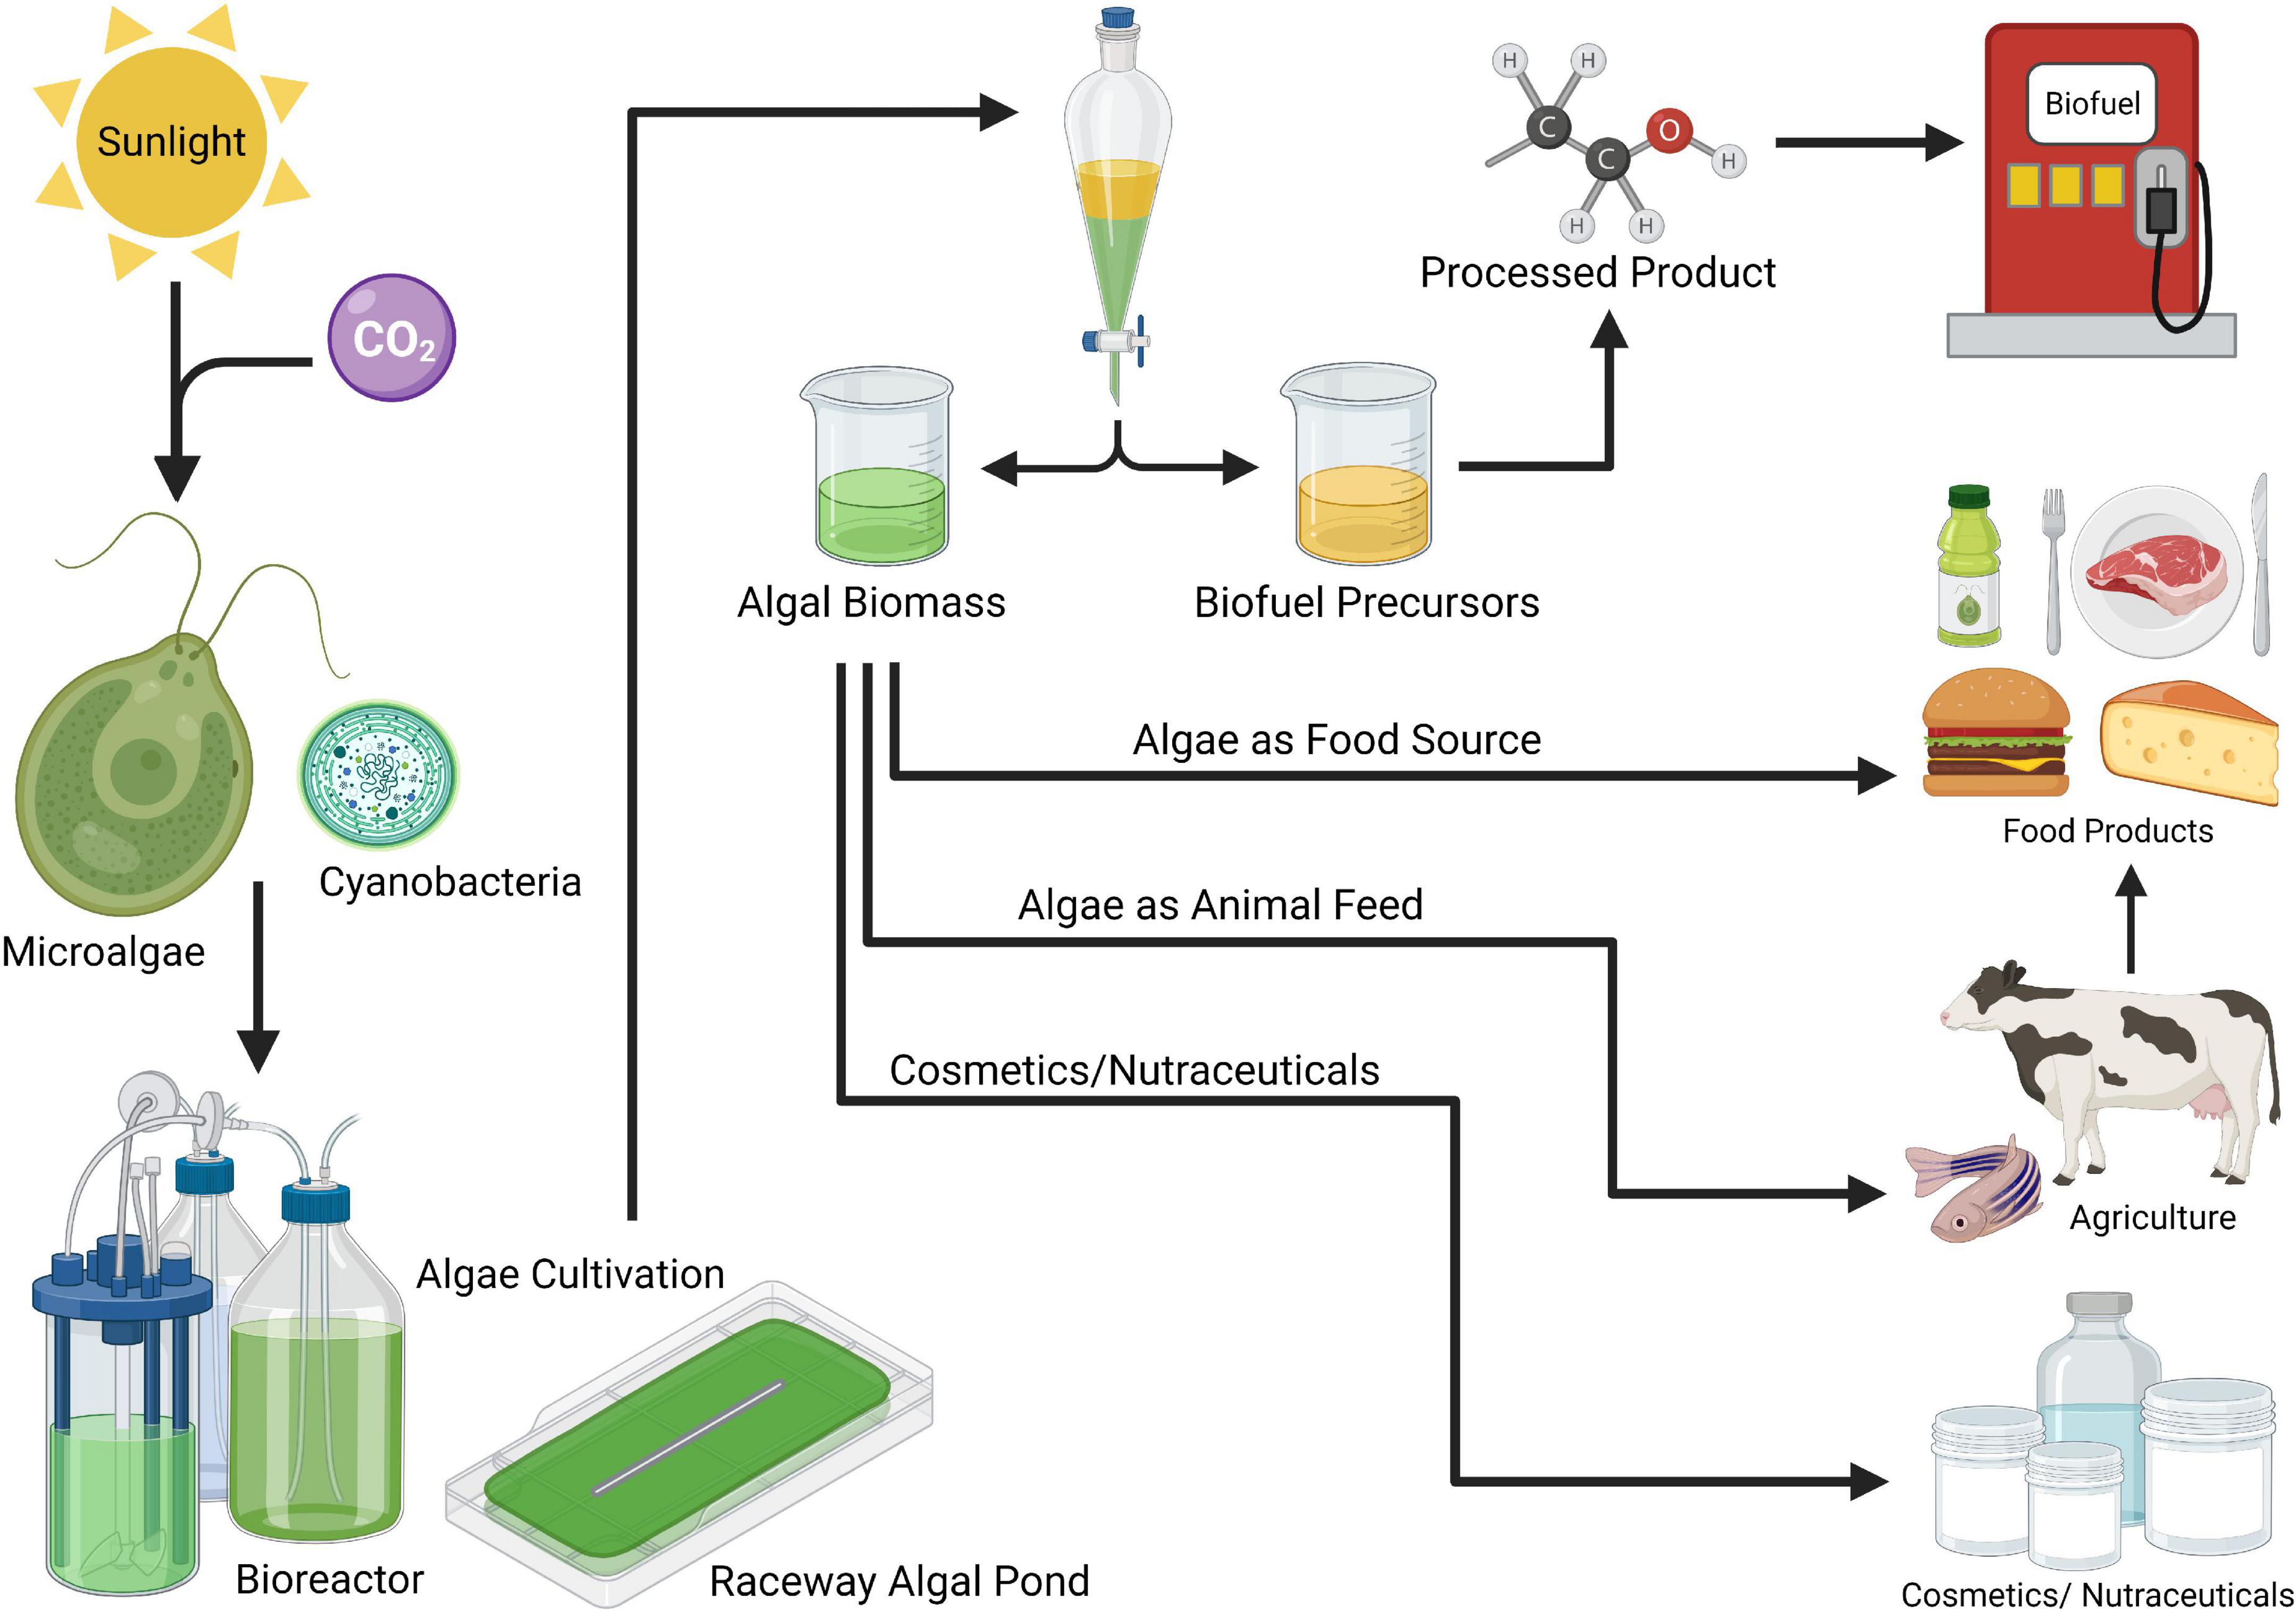 Frontiers | Developing algae as a sustainable food source